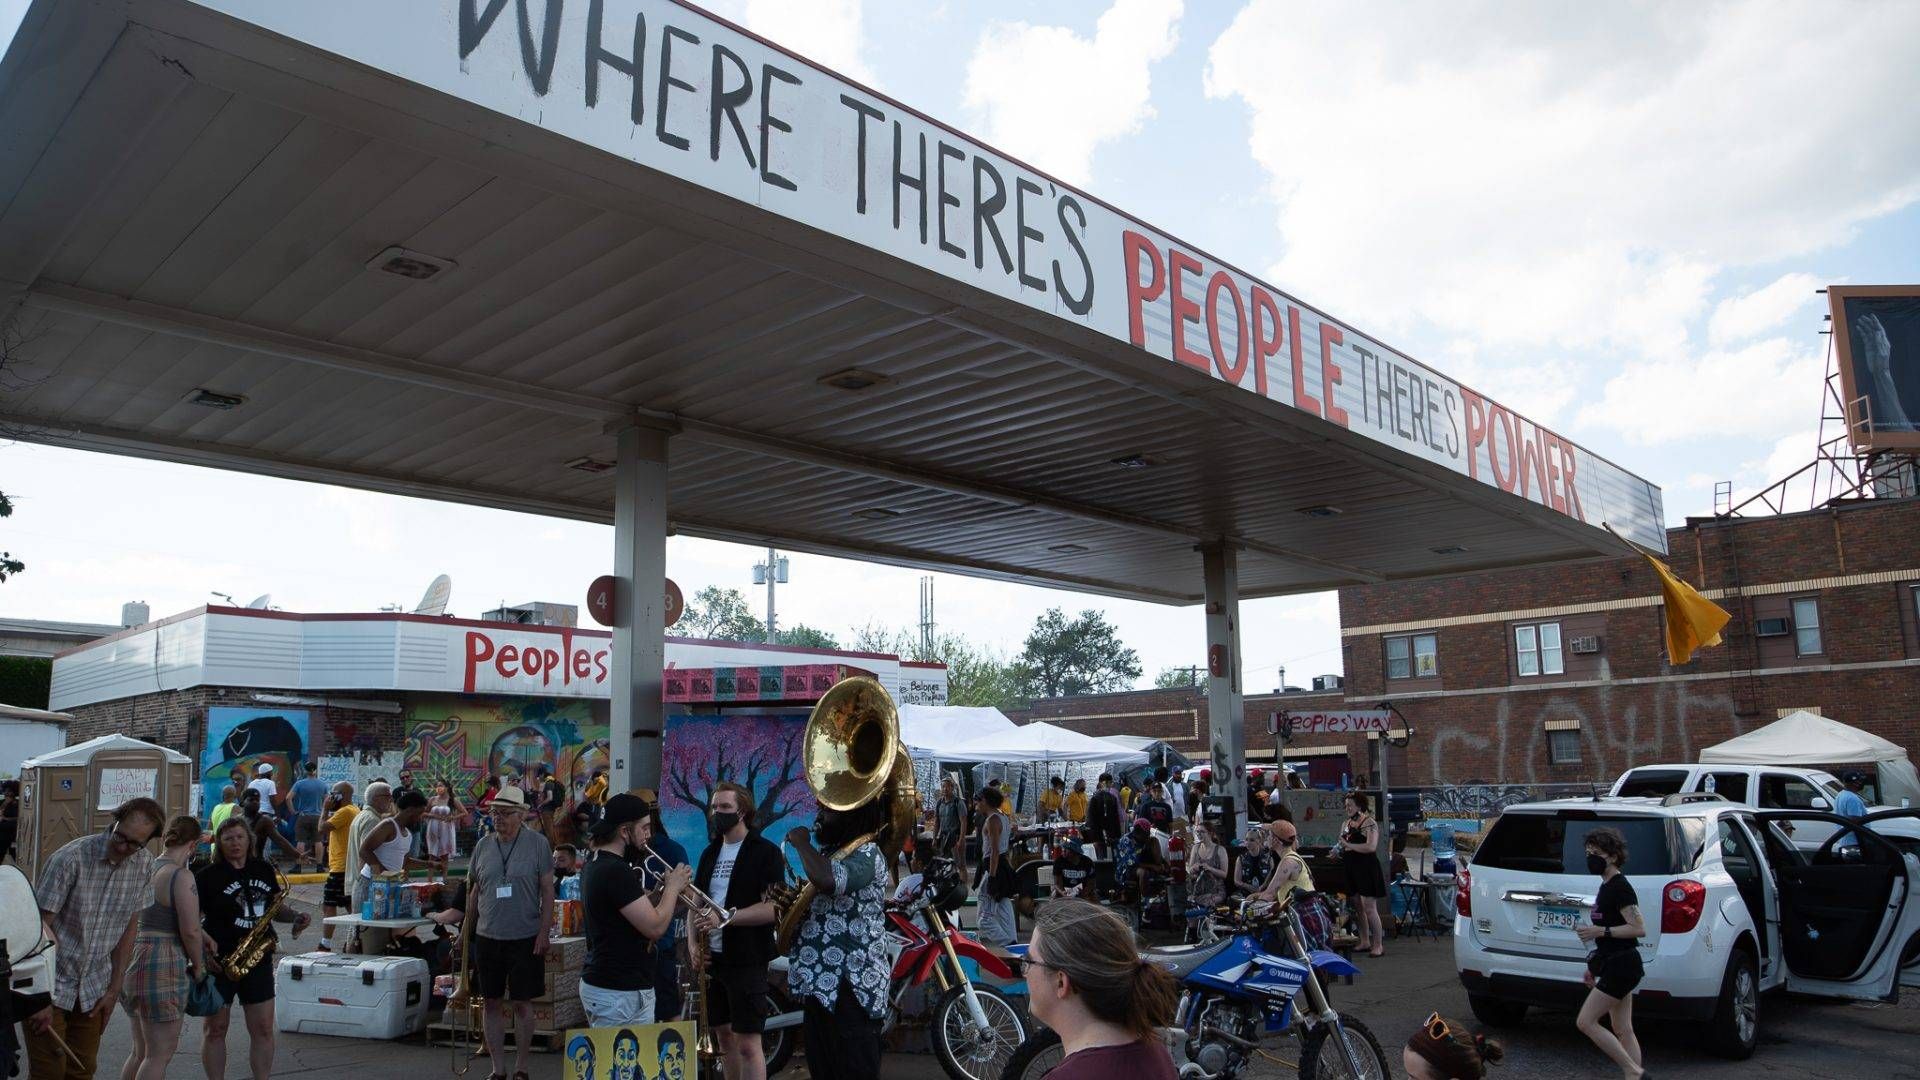 Dozens of people gather under the Speedway gas station at George Floyd Square. The station is painted over, reading "Where there's people there's power"